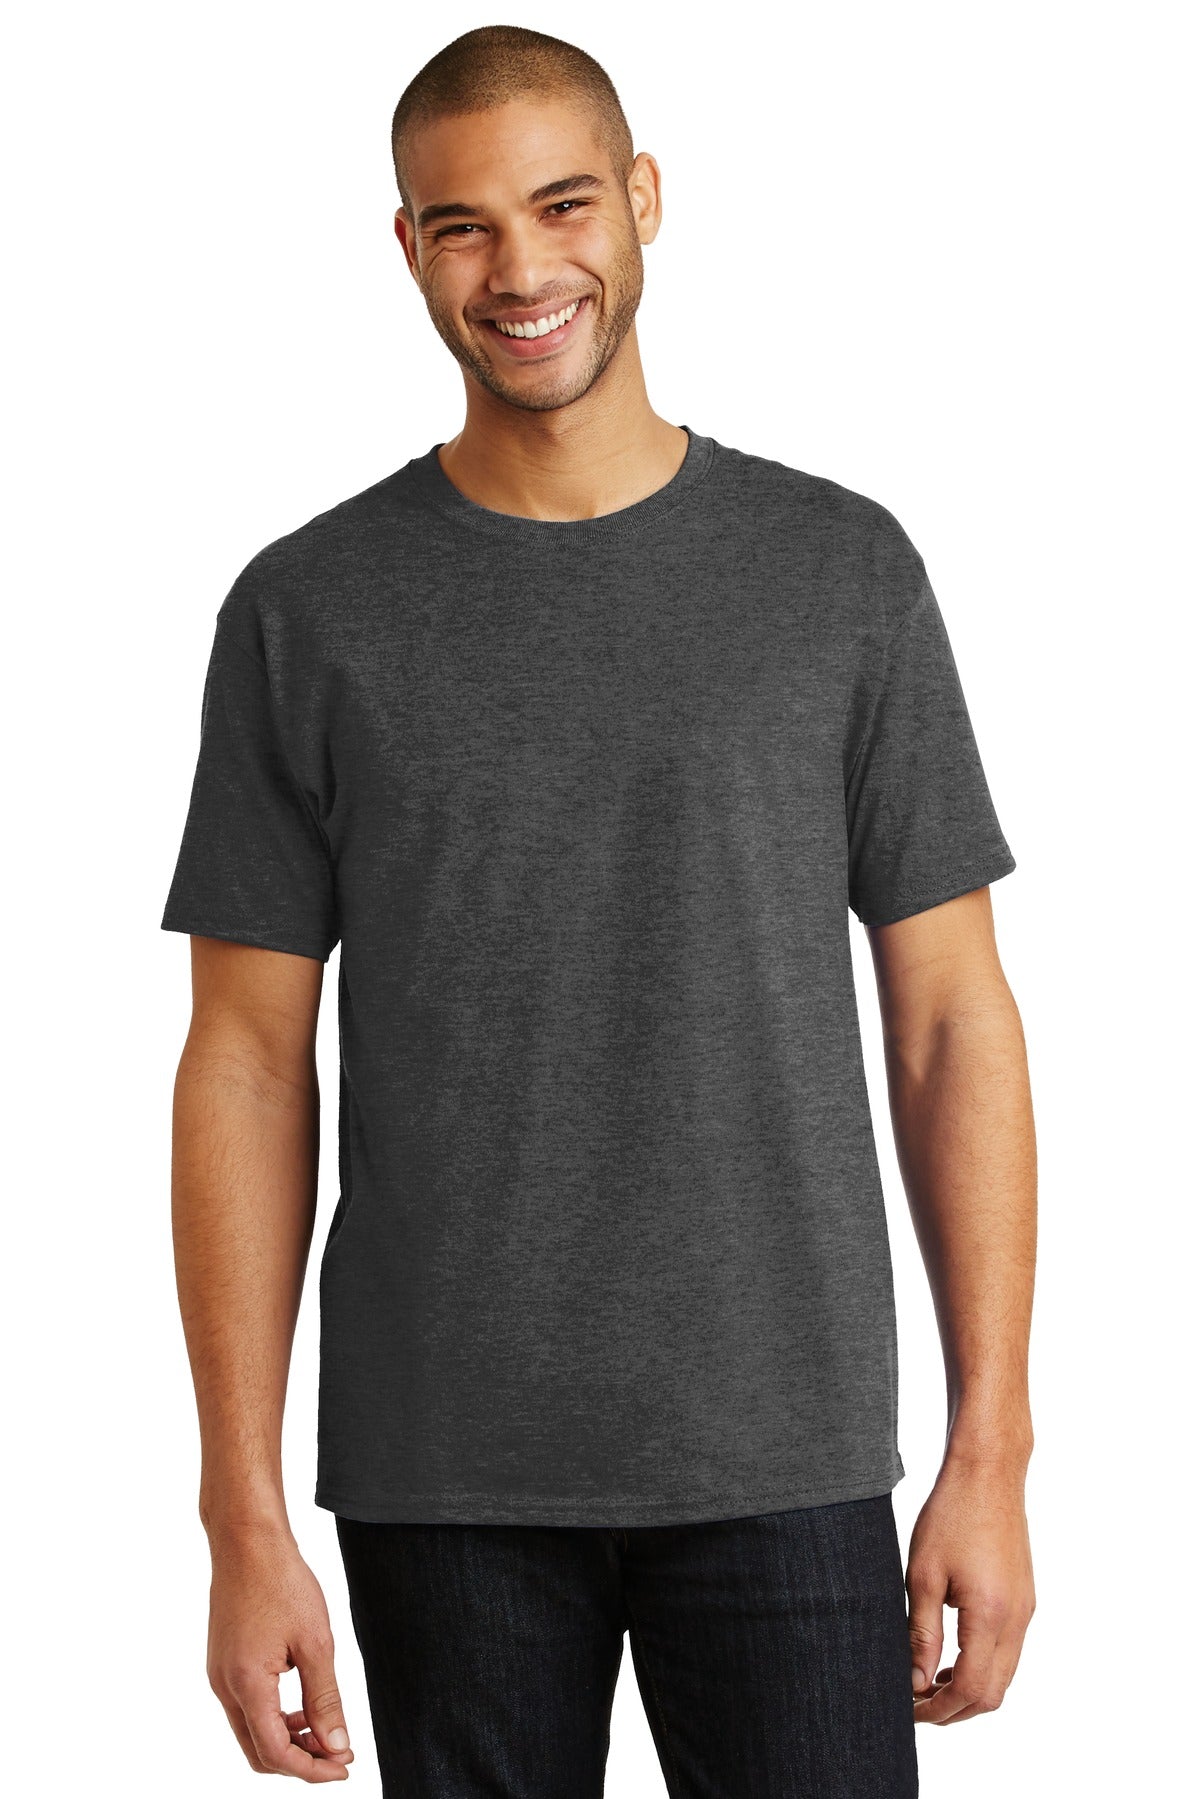 T-Shirts Charcoal Heather* Hanes